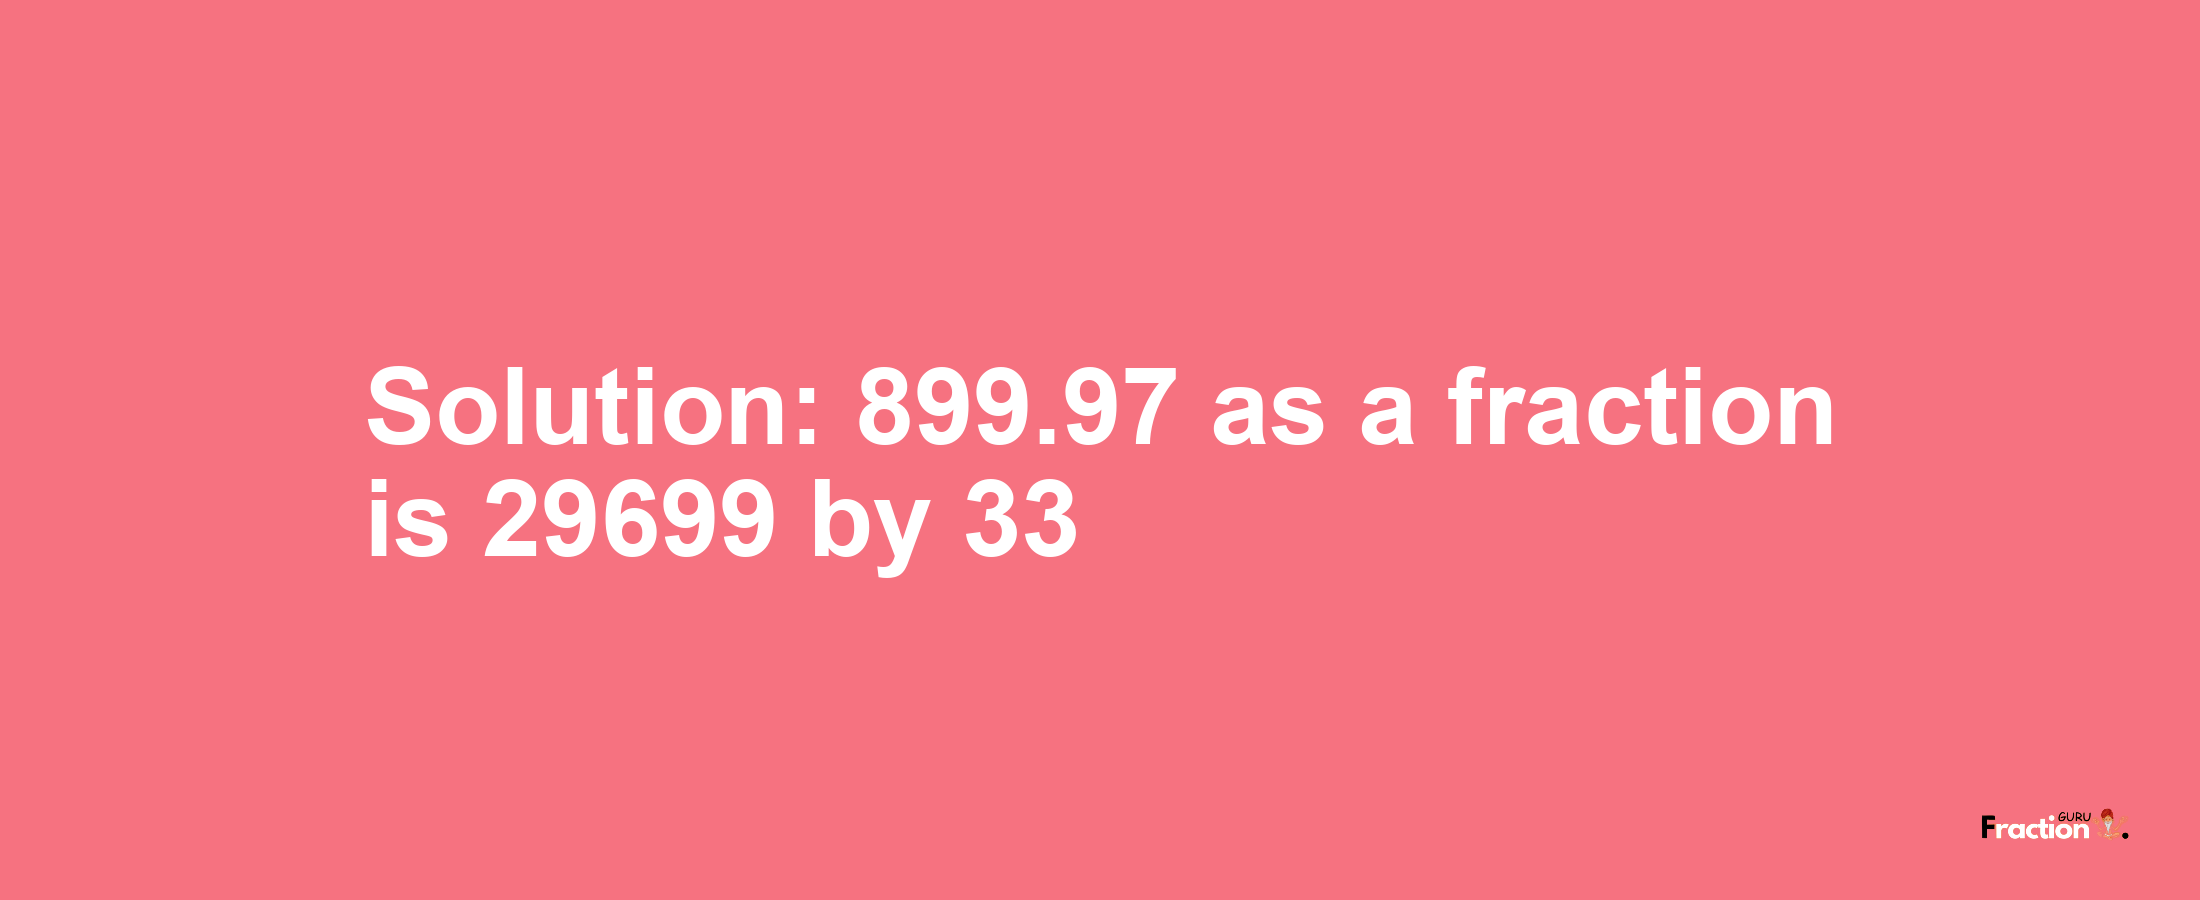 Solution:899.97 as a fraction is 29699/33